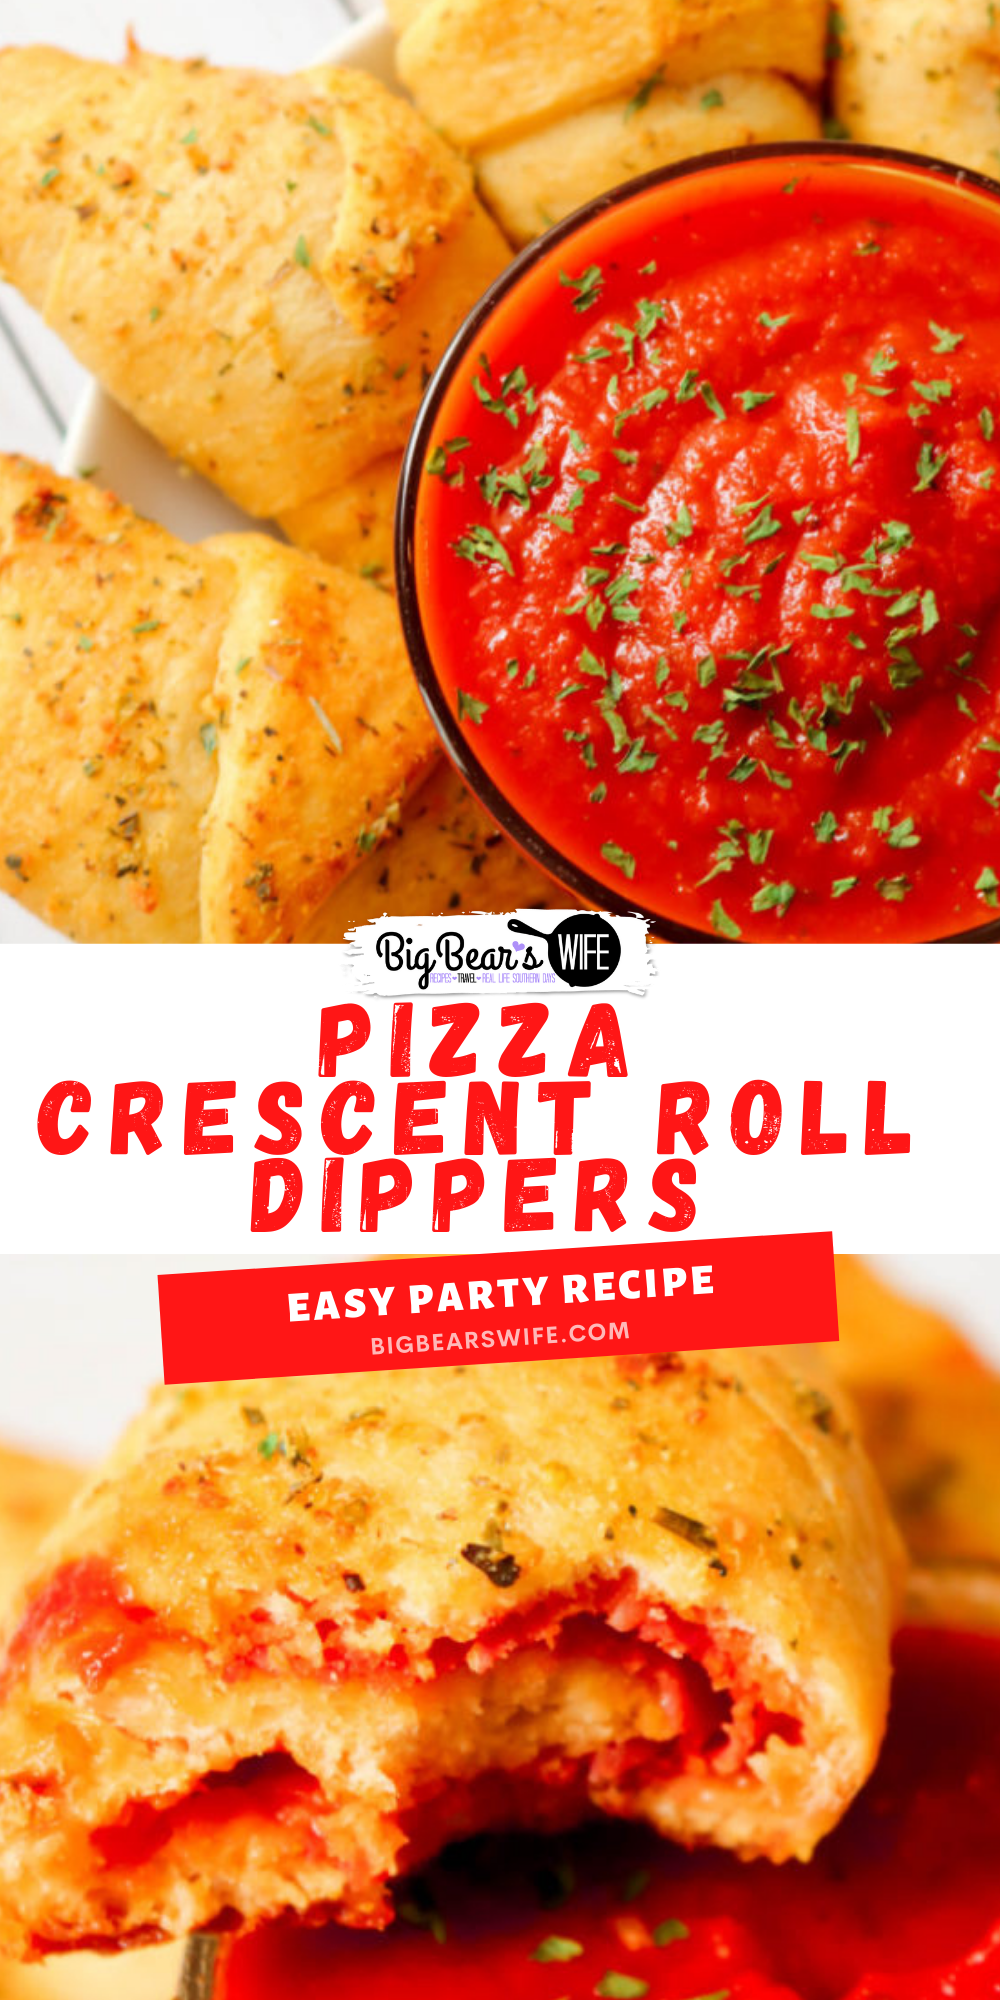 These Pizza Crescent Roll Dippers are tasty bites of pizza wrapped up in baked garlic olive oil brushed crescent rolls and dipped in marinara sauce. They make a great snack or an easy lunch or dinner! via @bigbearswife